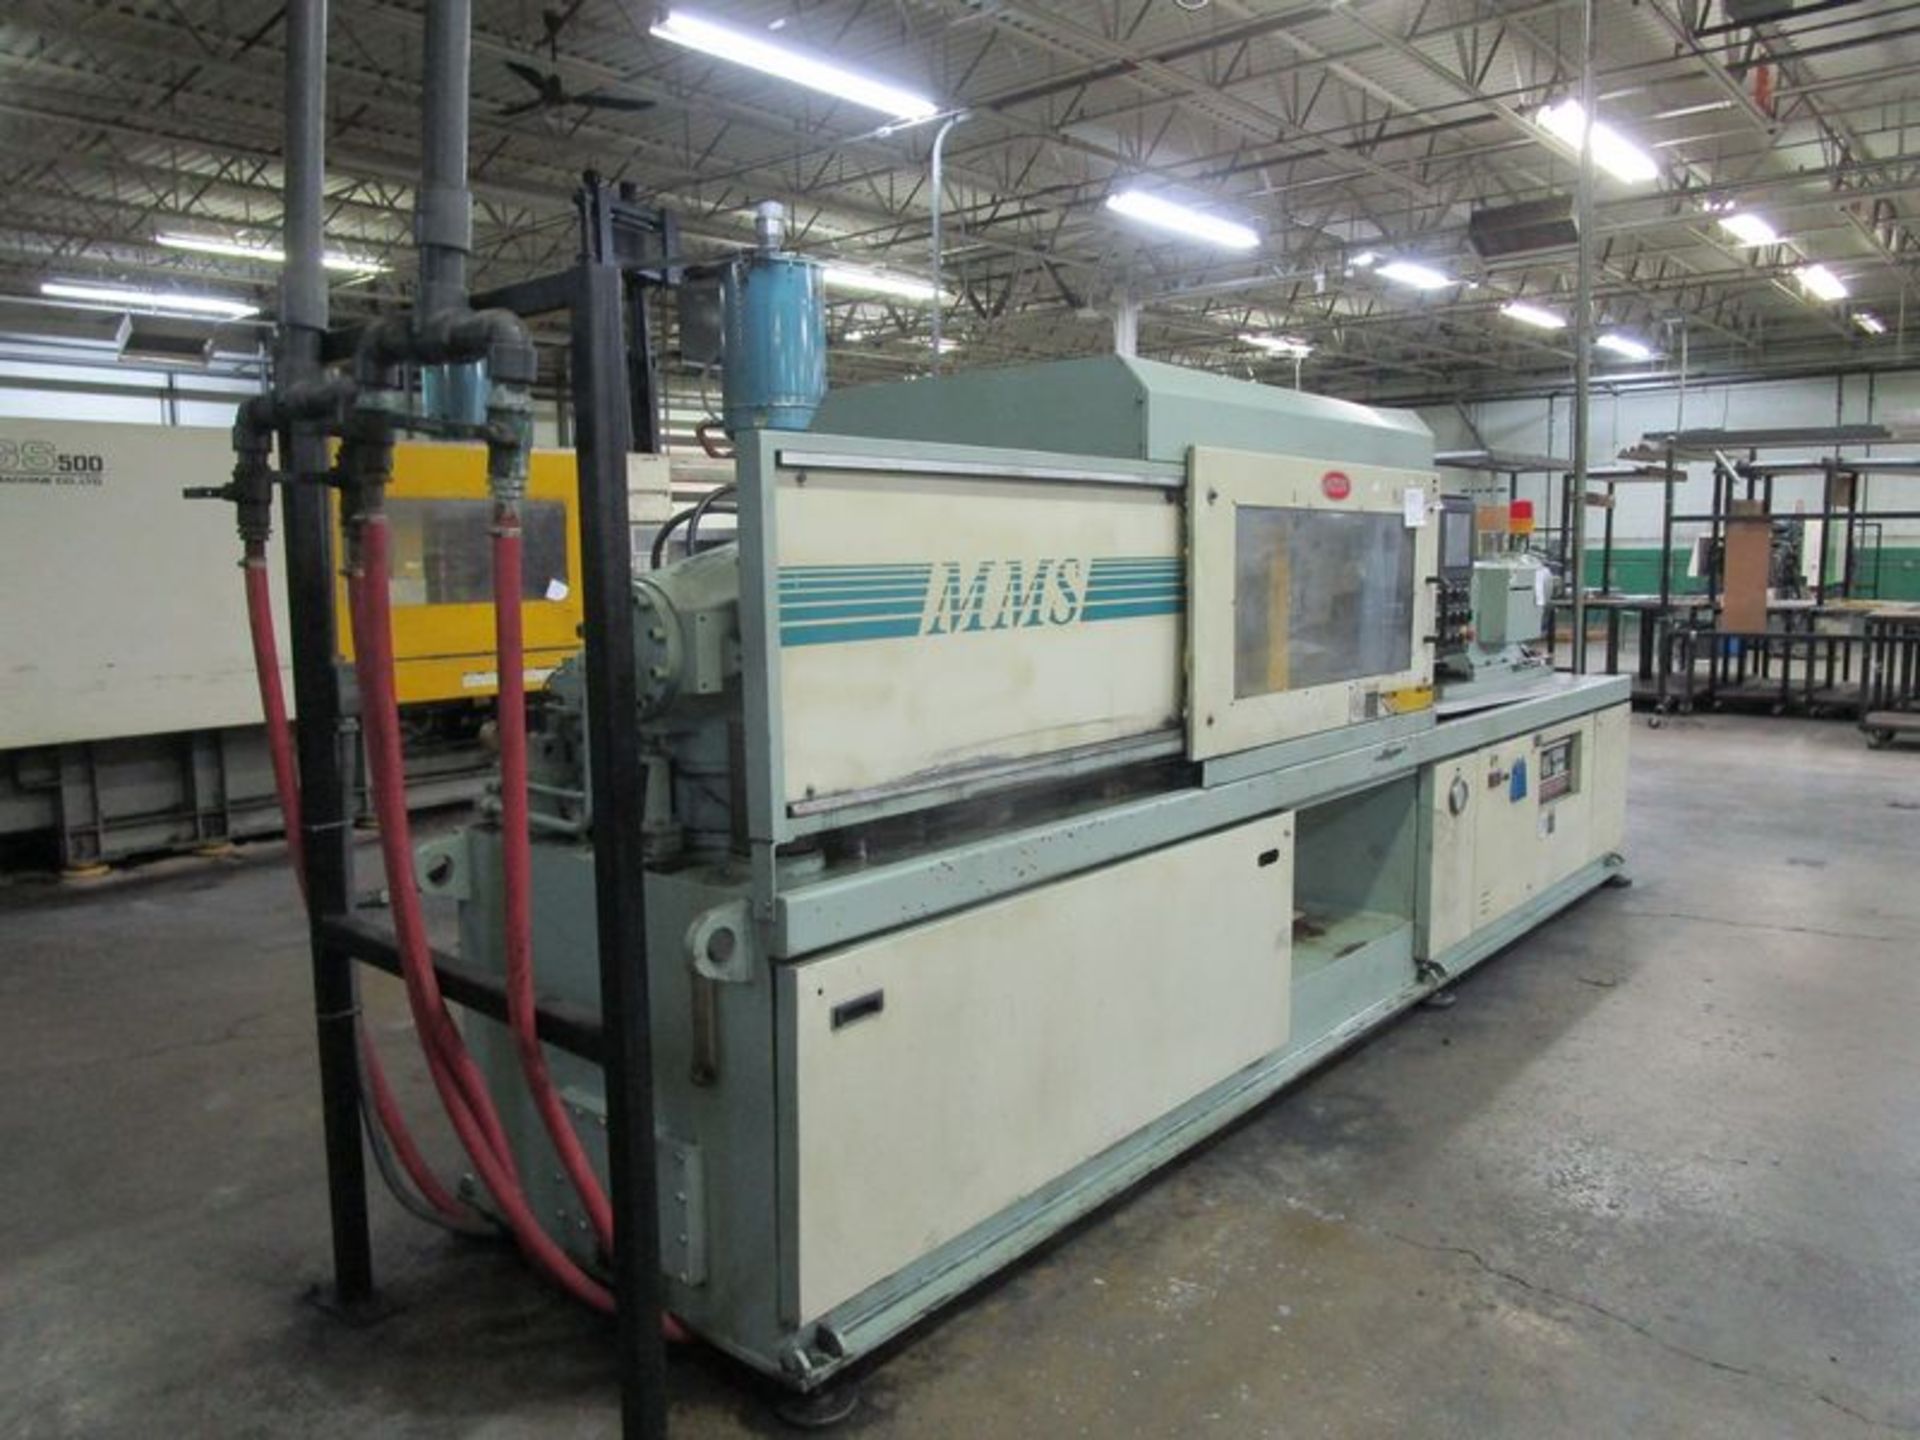 Nissin NC-145-FX2C 145-Ton Plastic Injection Molding Machine, S/N 95-145-13, 1995 - Image 5 of 9